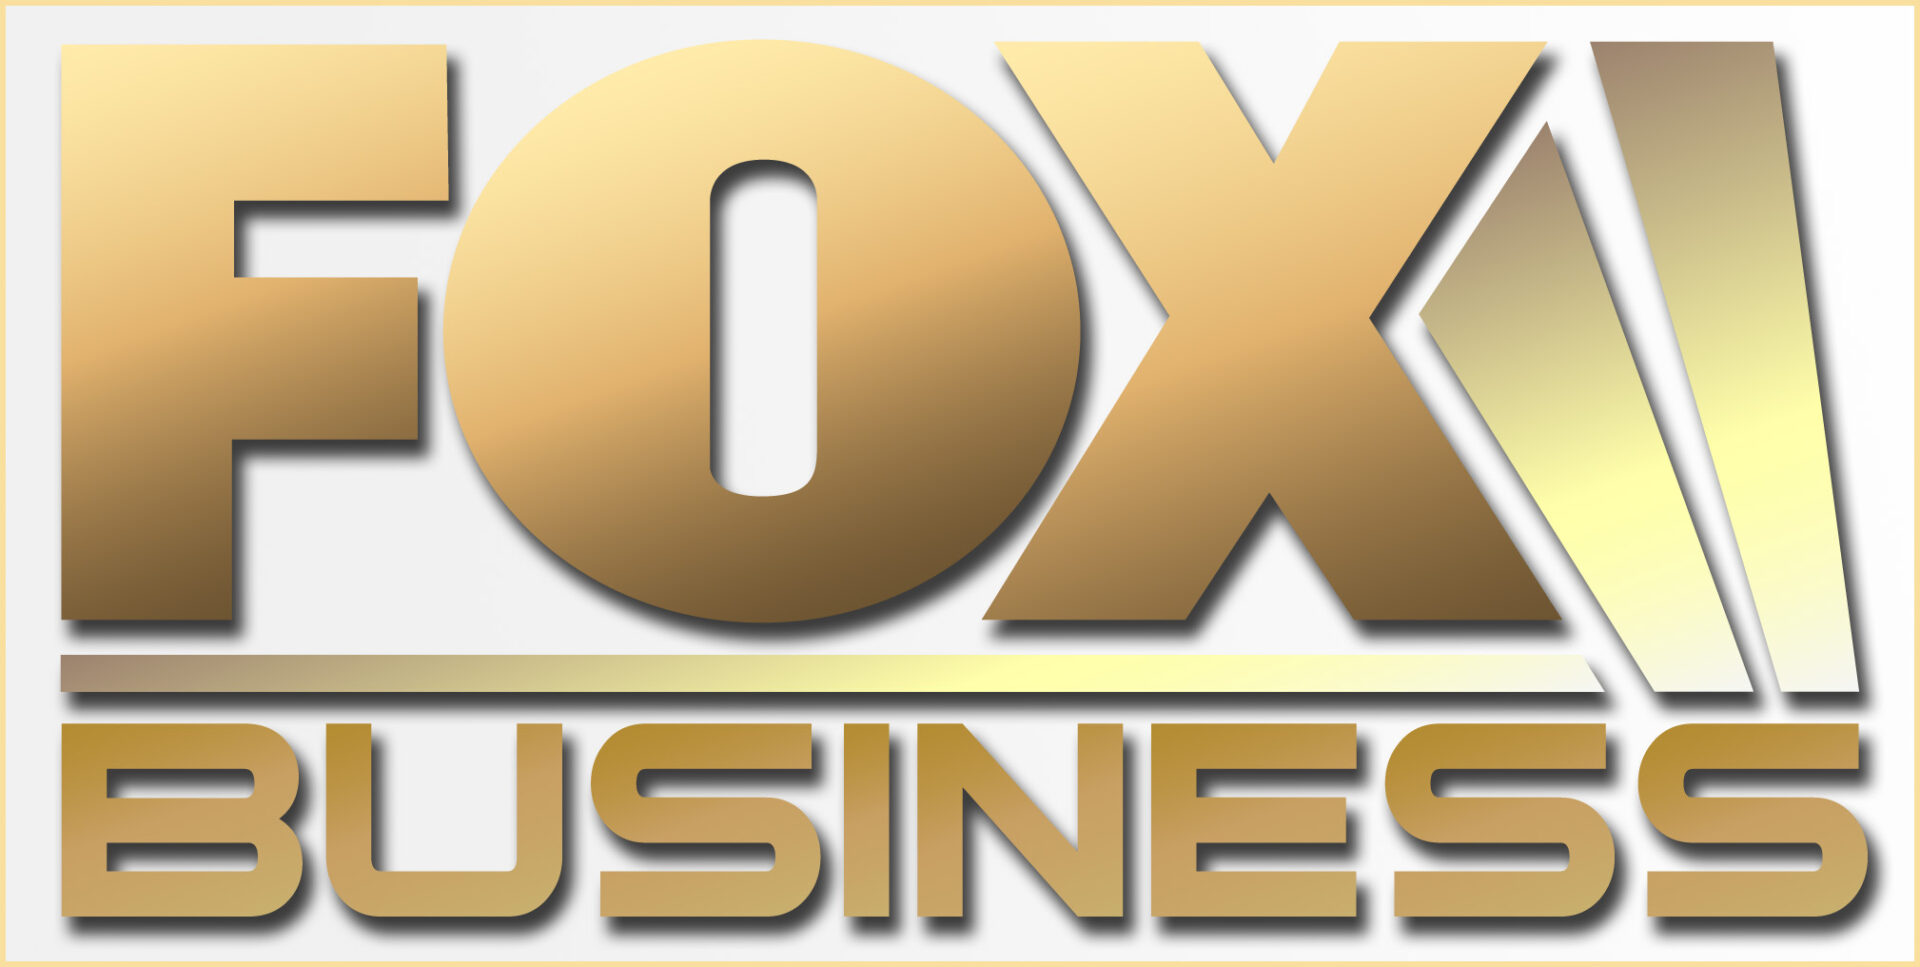 A gold colored fox business logo.